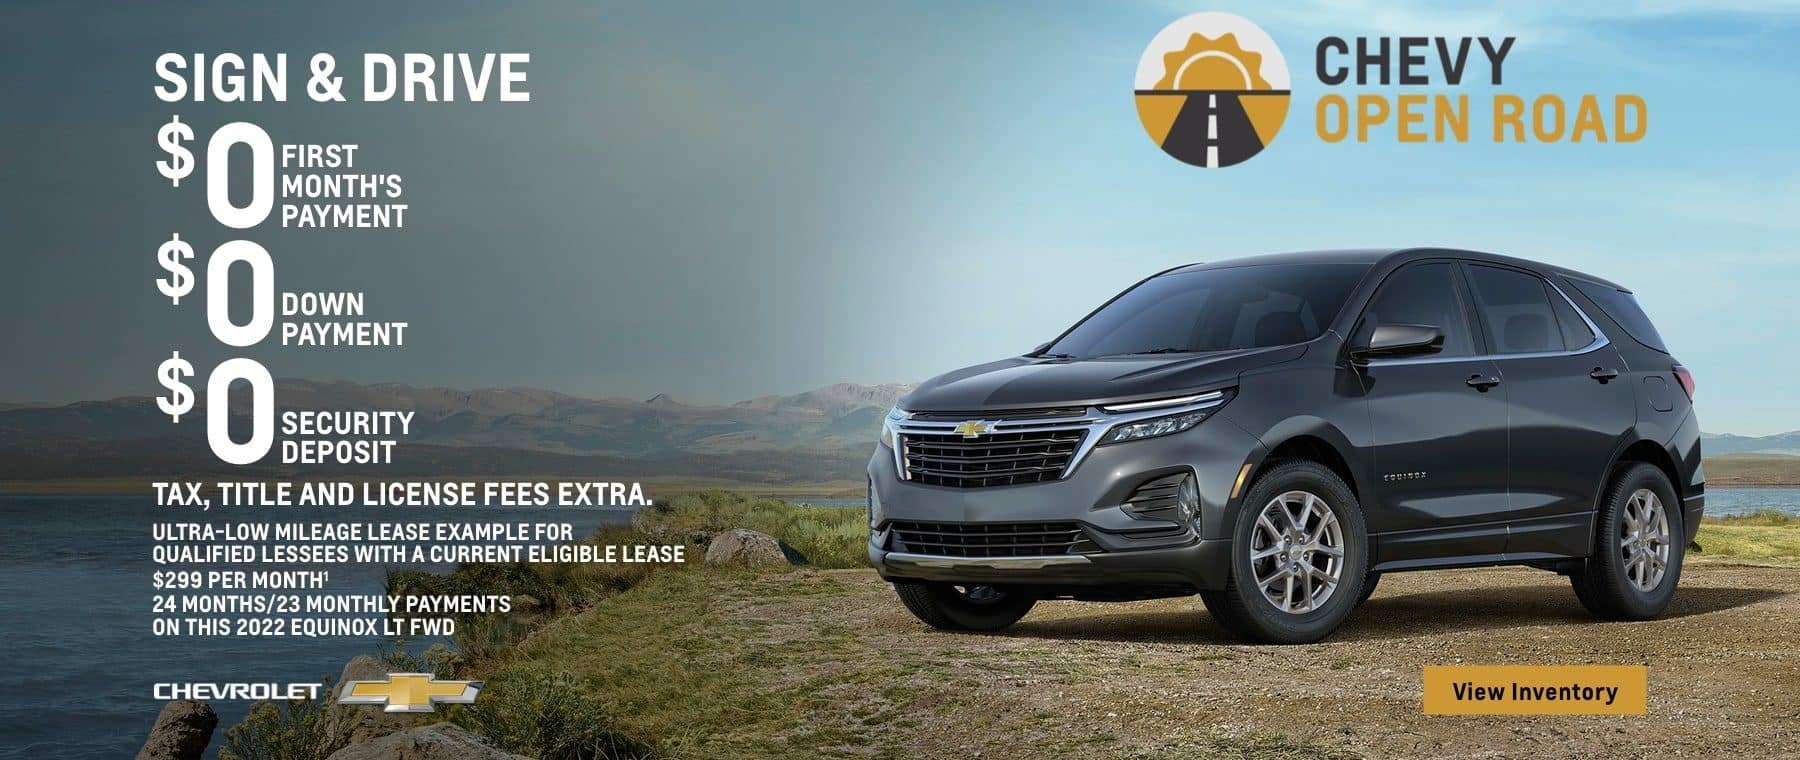 2022 Chevy Equinox LT FWD. Sign & Drive. $0 first month's payment. $0 down payment. $0 security deposit. Tax, title and license fees extra. Ultra-low mileage lease example for qualified lessees with a current eligible lease. $299 per month. 24 months/23 monthly payments on this Equinox LT FWD.